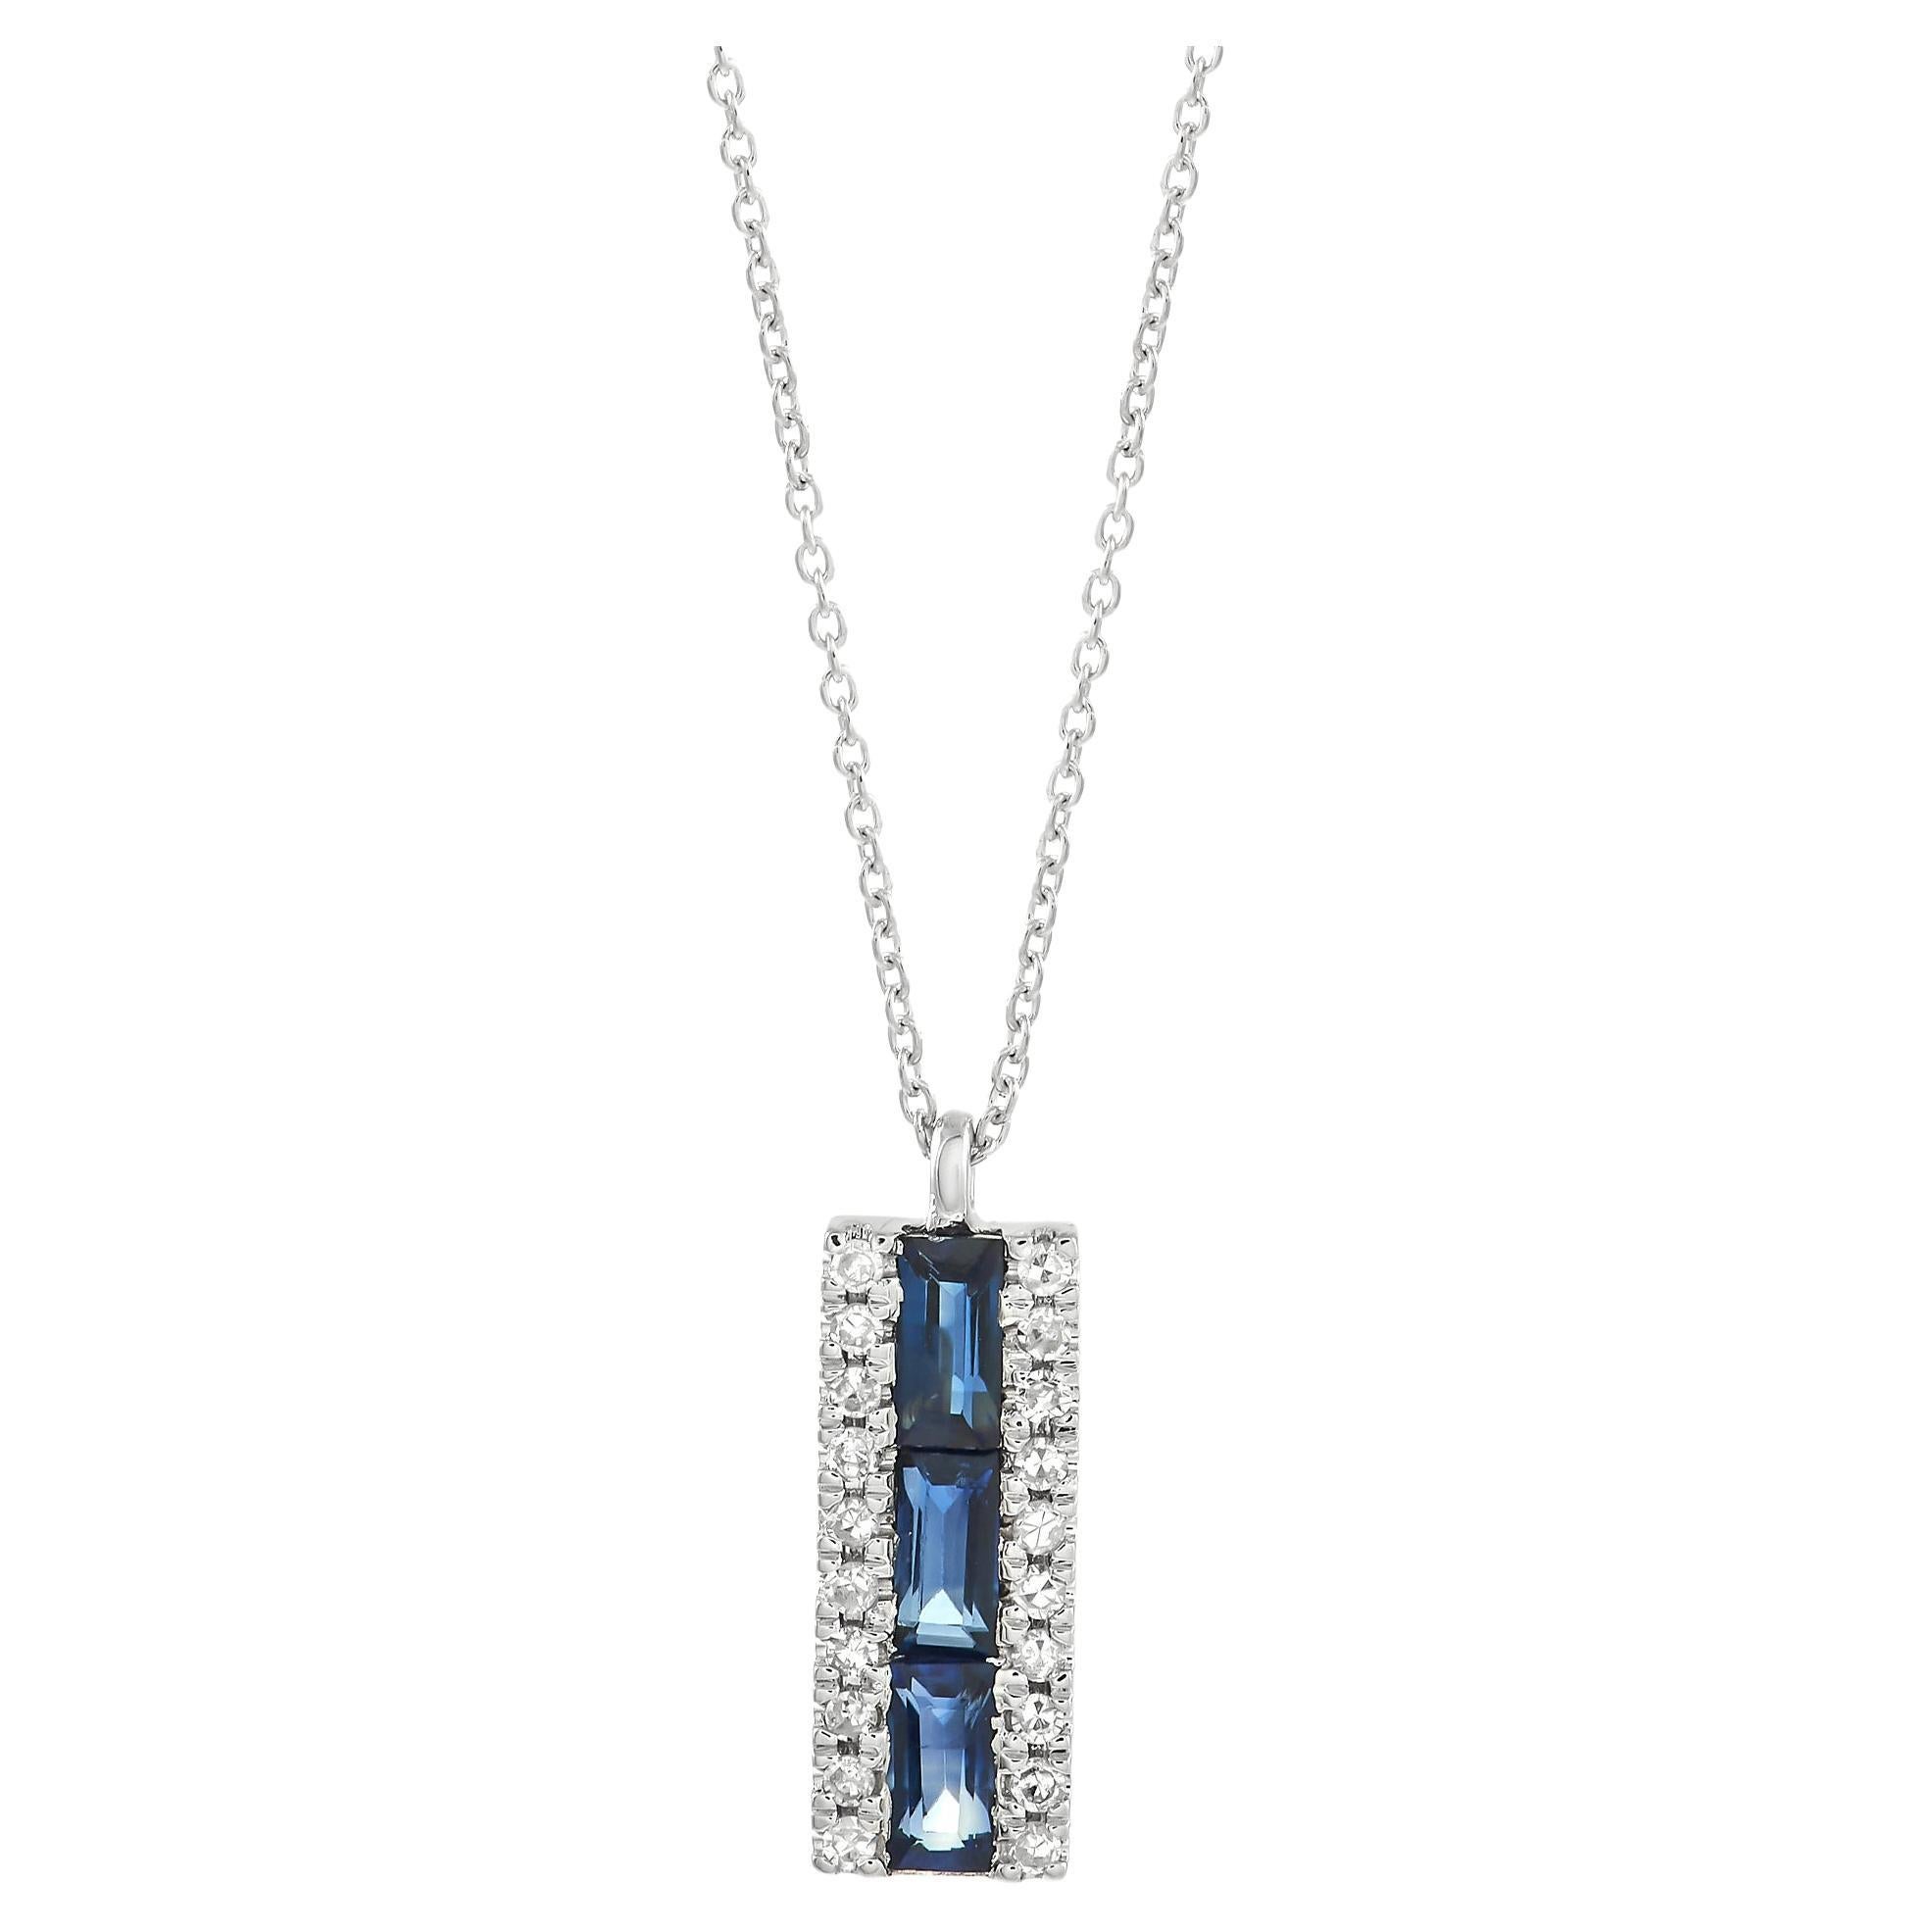 LB Exclusive 14K White Gold 0.10 Ct Diamond and Sapphire Necklace For Sale